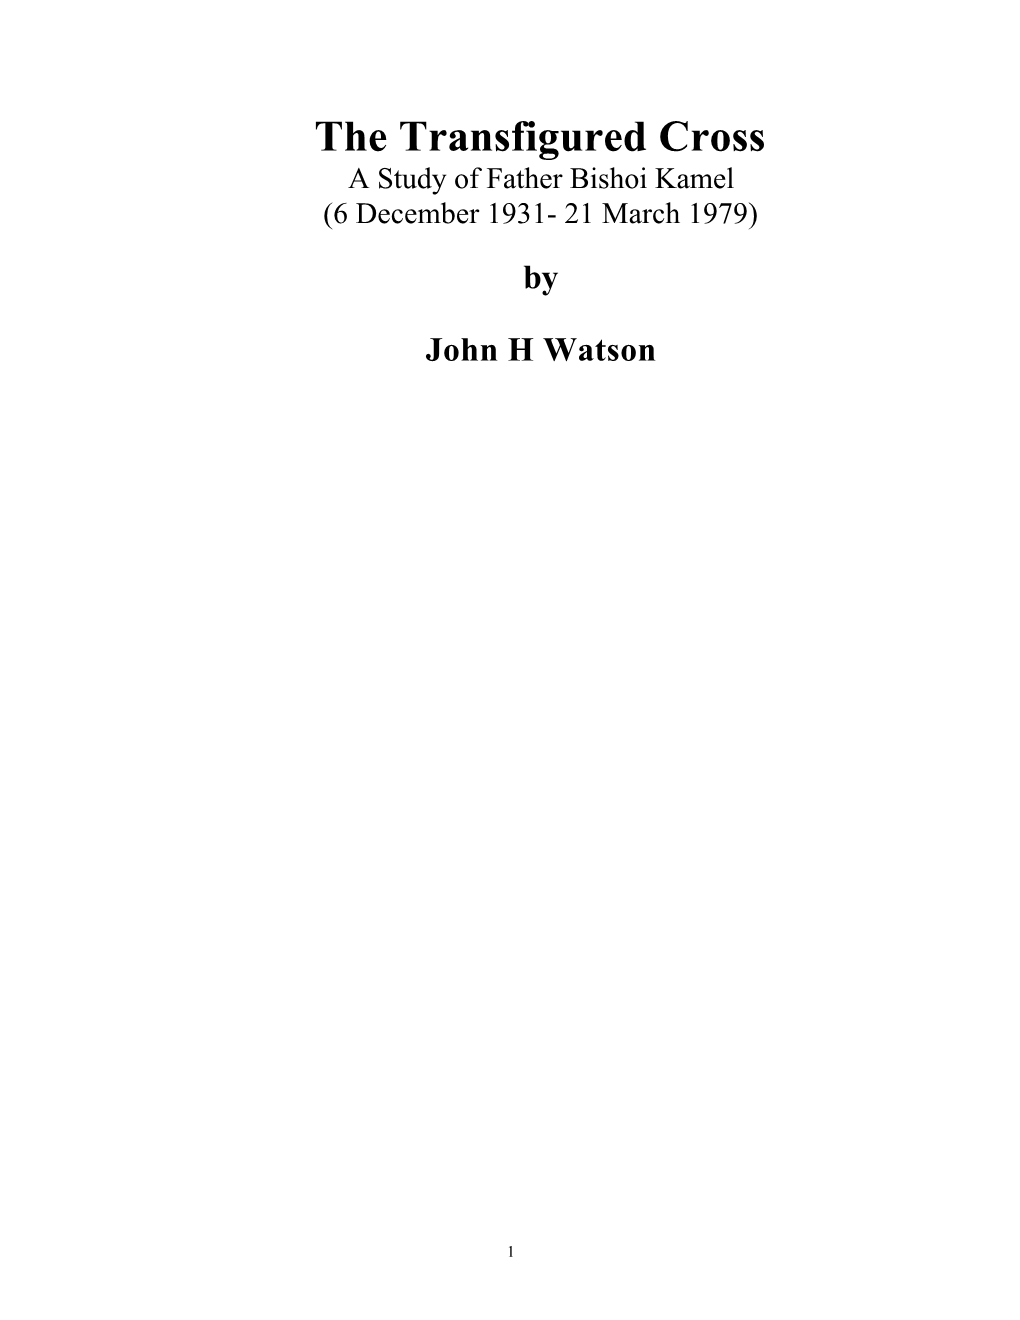 The Transfigured Cross: a Study of Father Bishoi Kamel